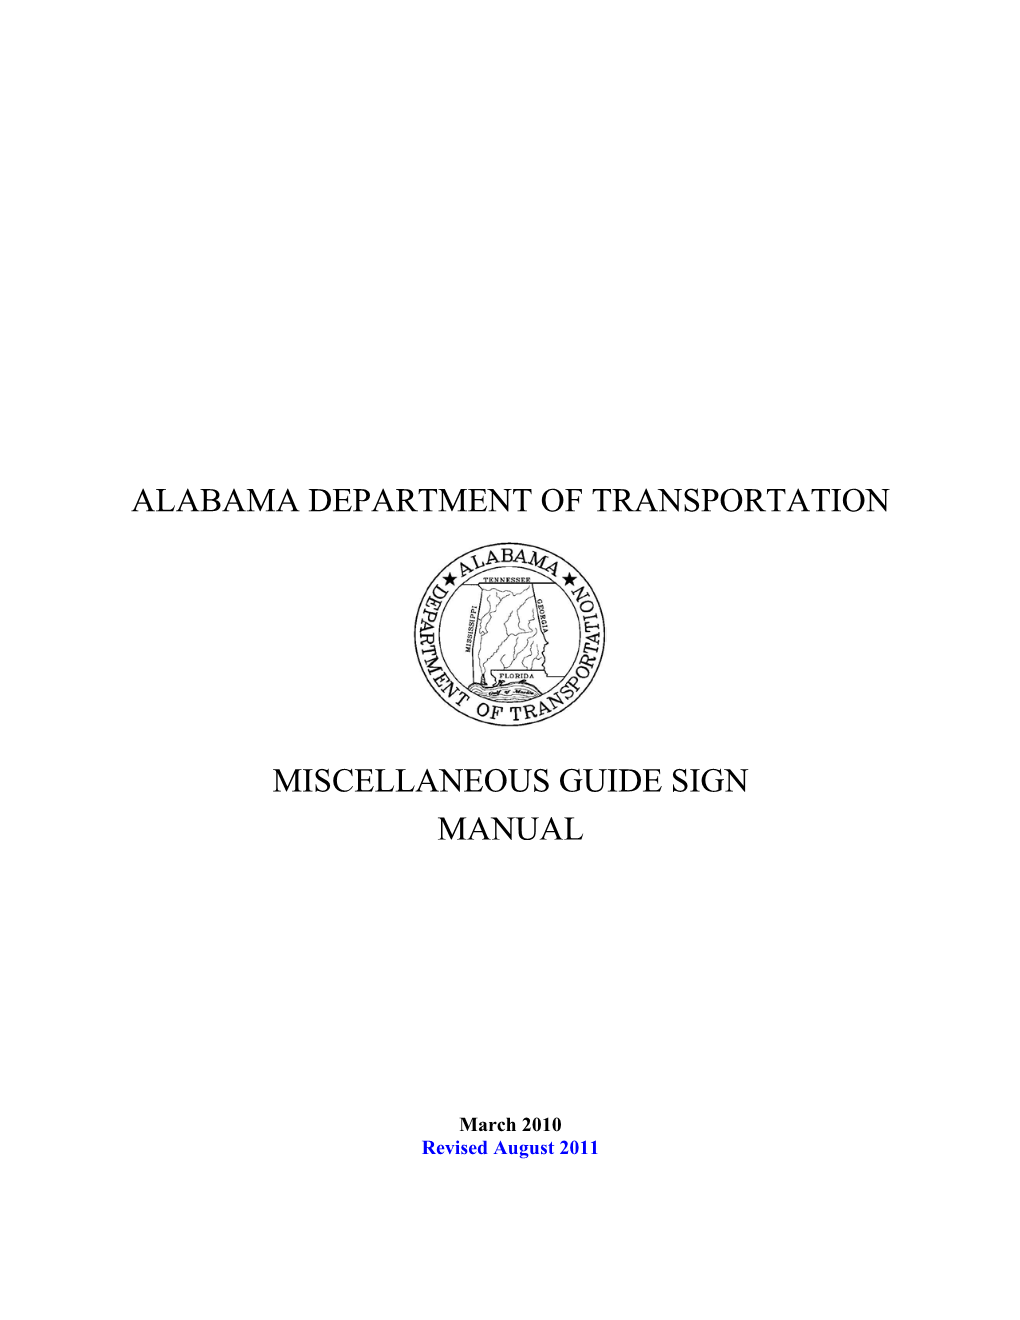 Miscellaneous Guide Sign Manual